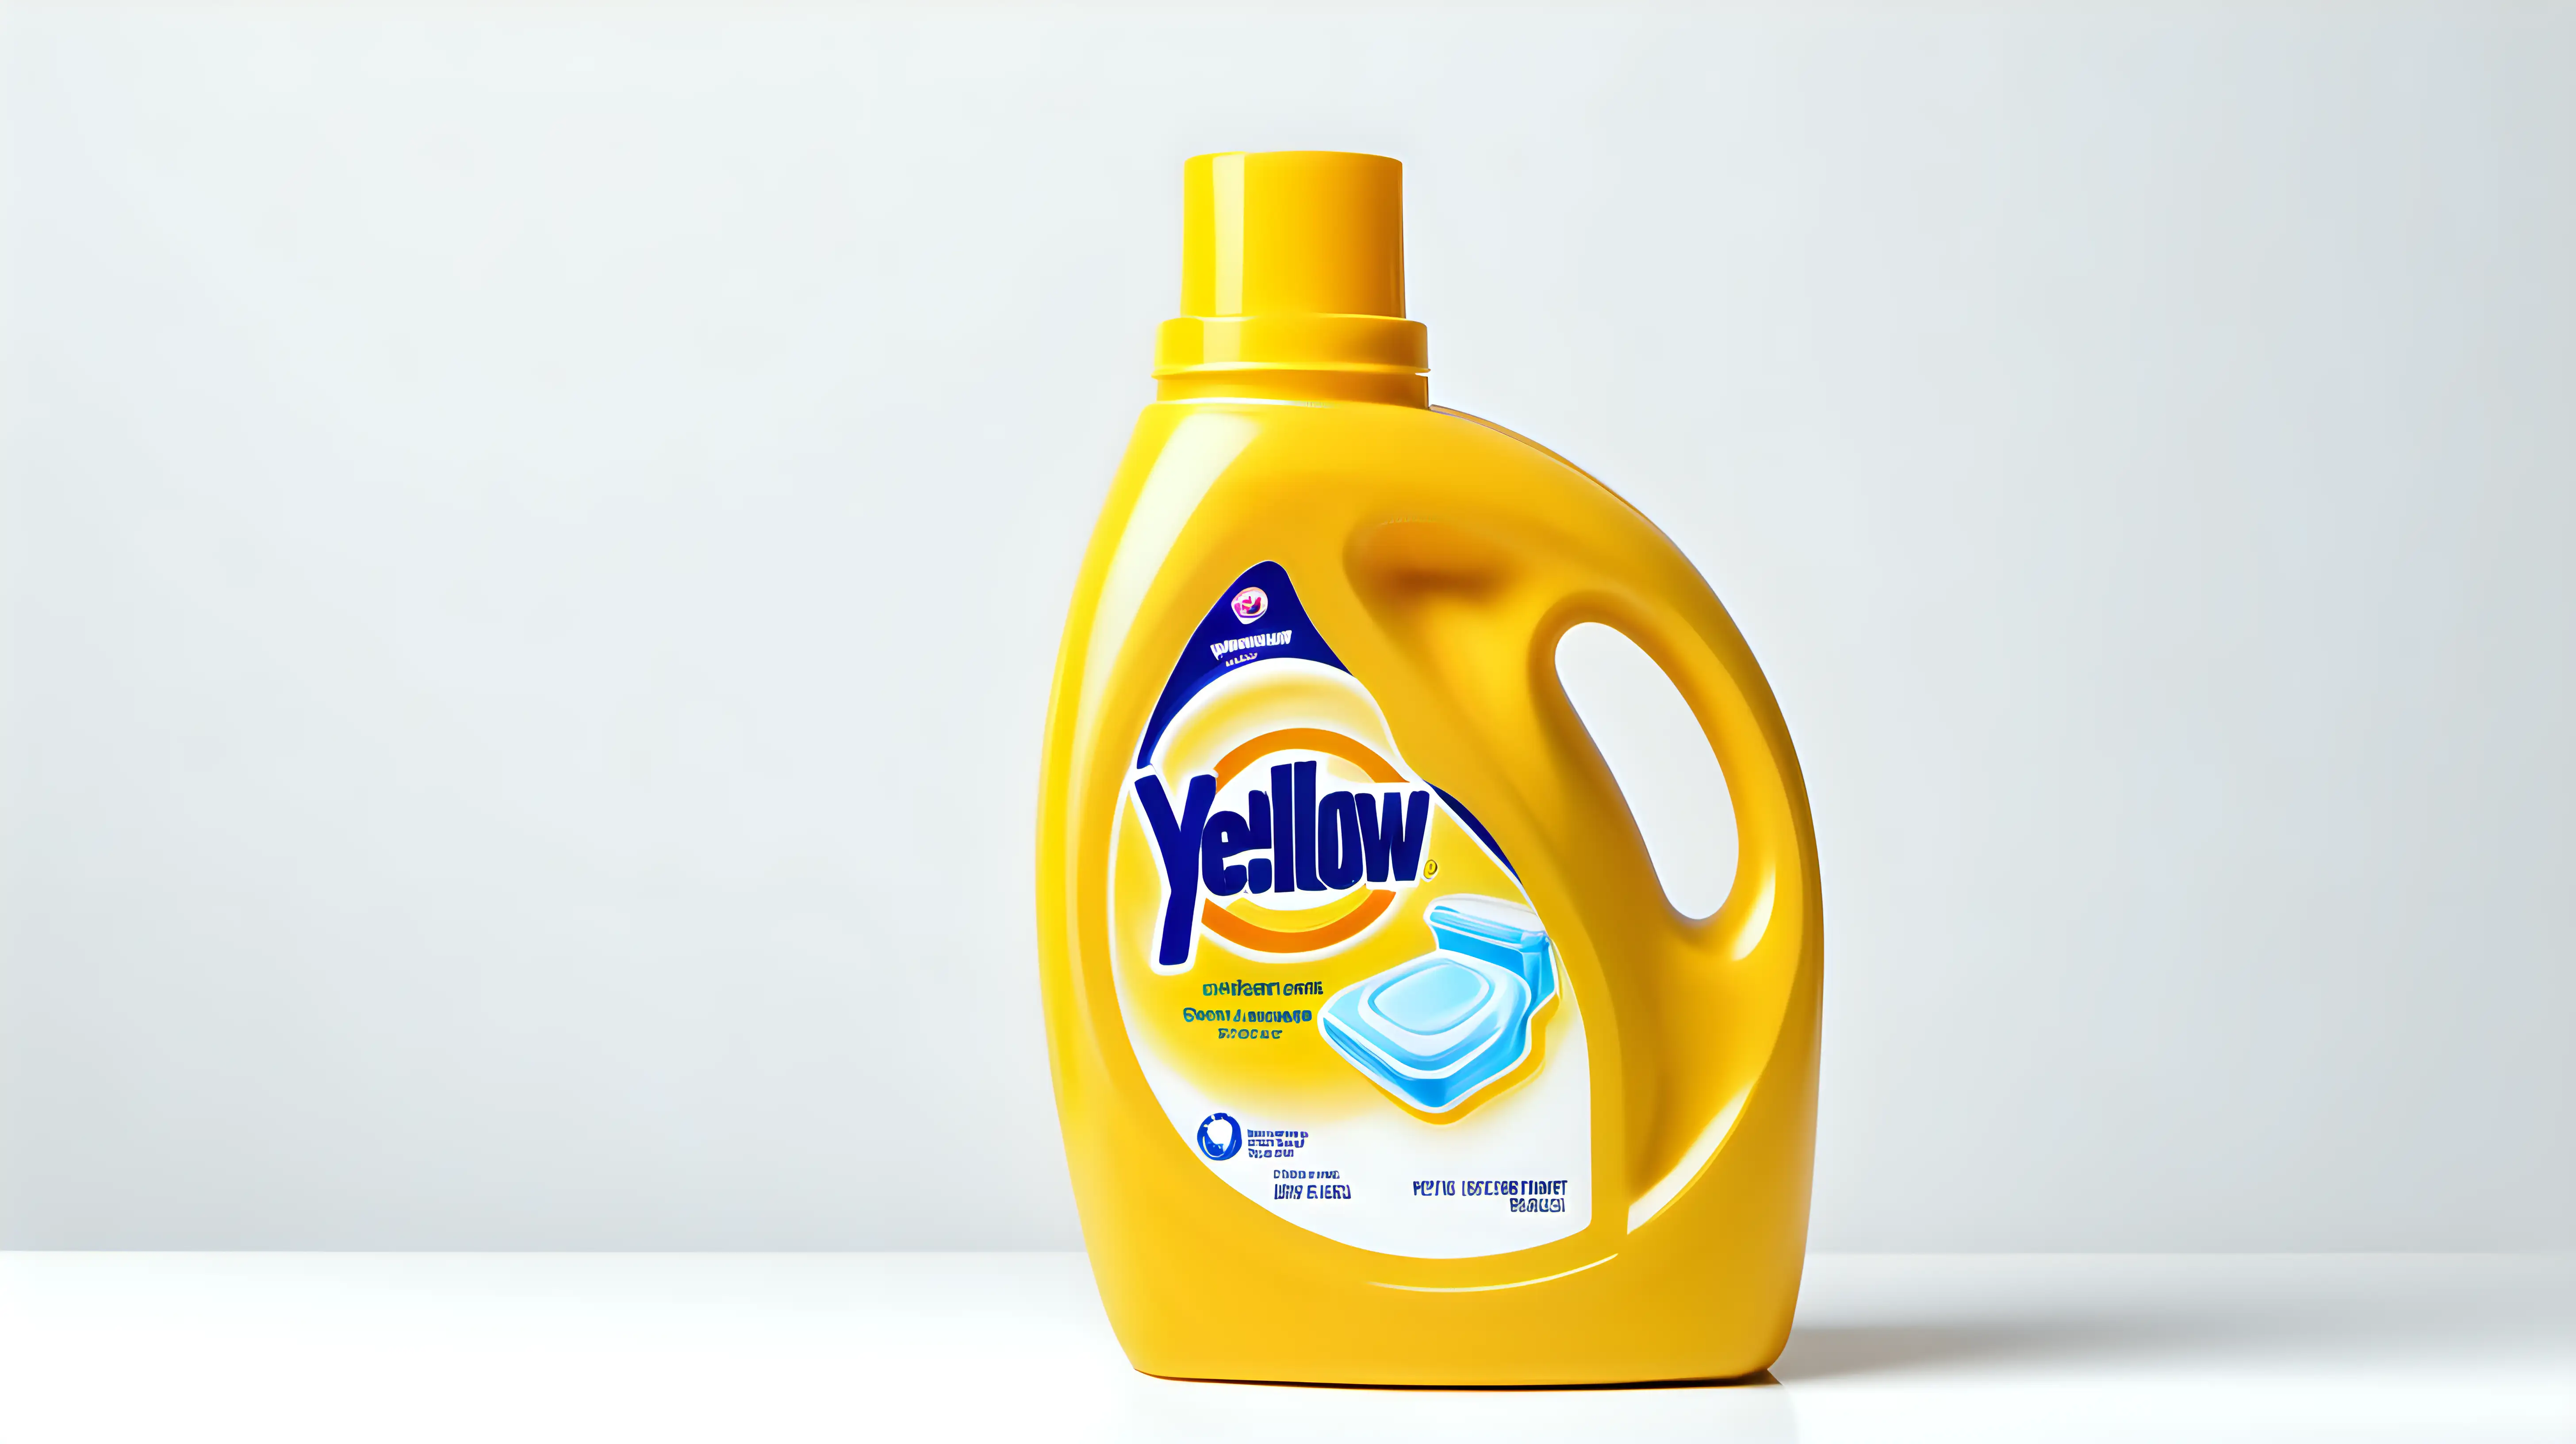 Vibrant Yellow Detergent Container on Clean White Background